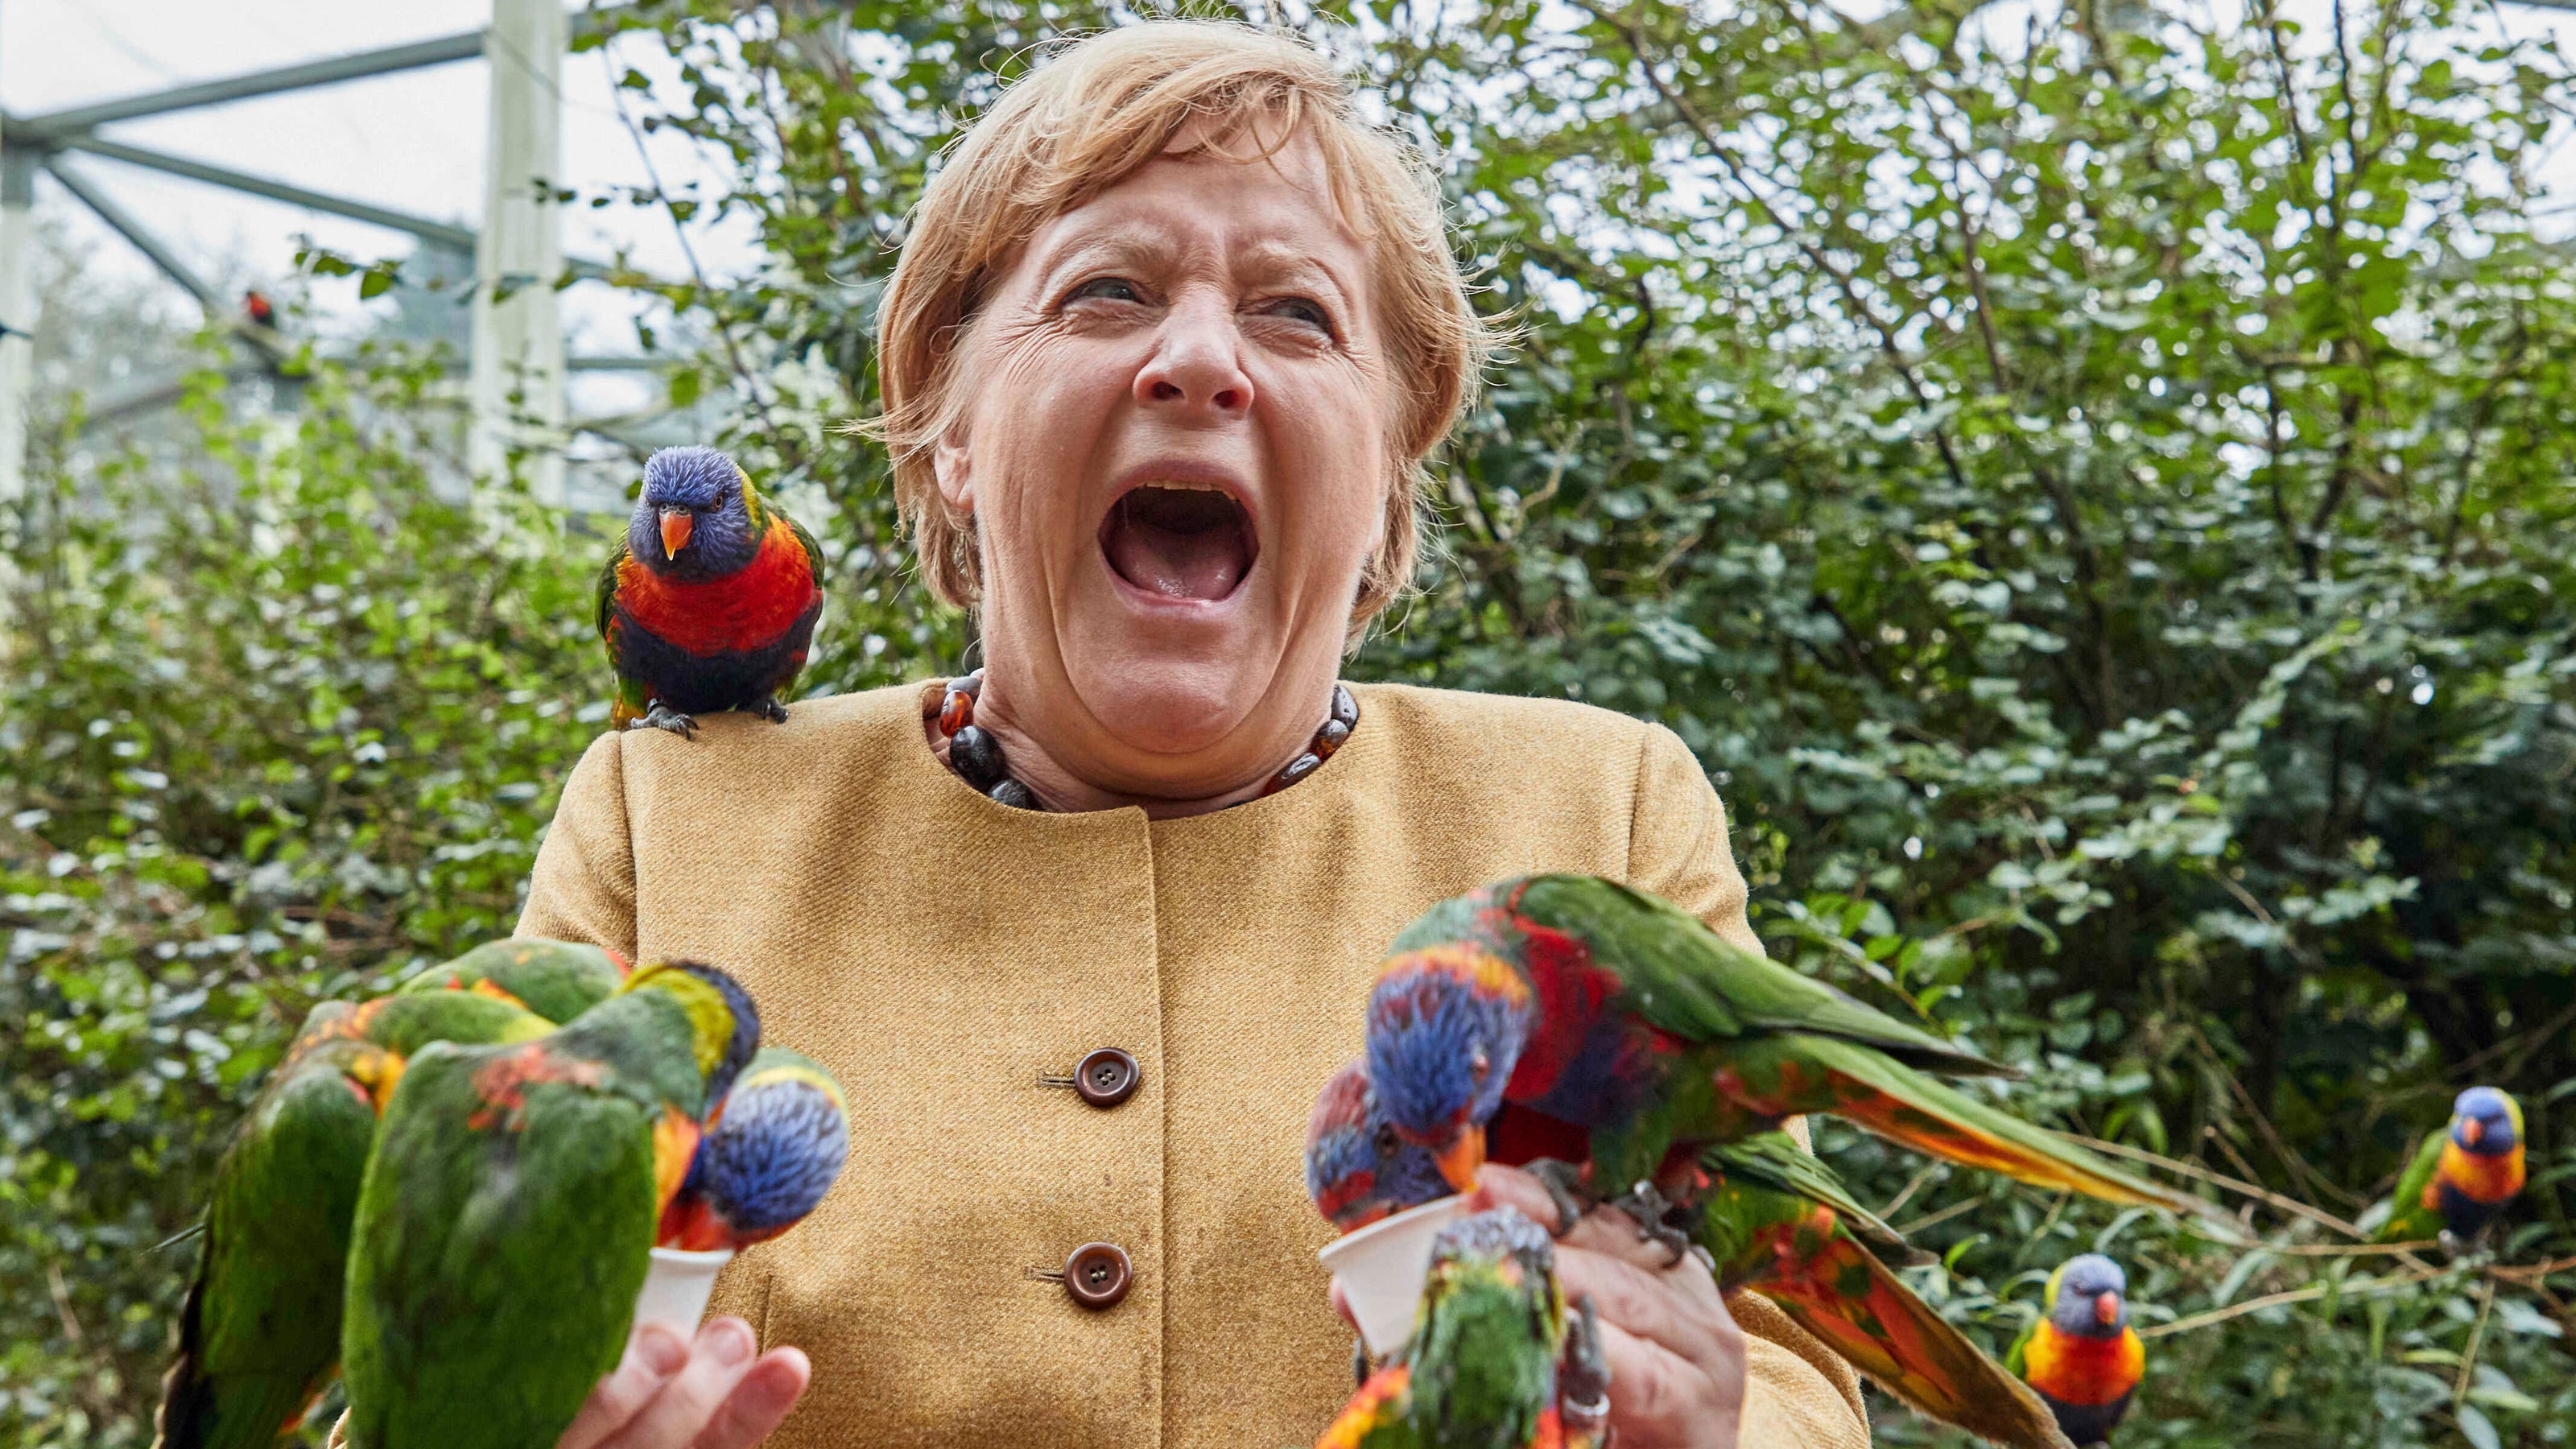 Outgoing German Leader Angela Merkel pecked by parrots at bird park - USA TODAY